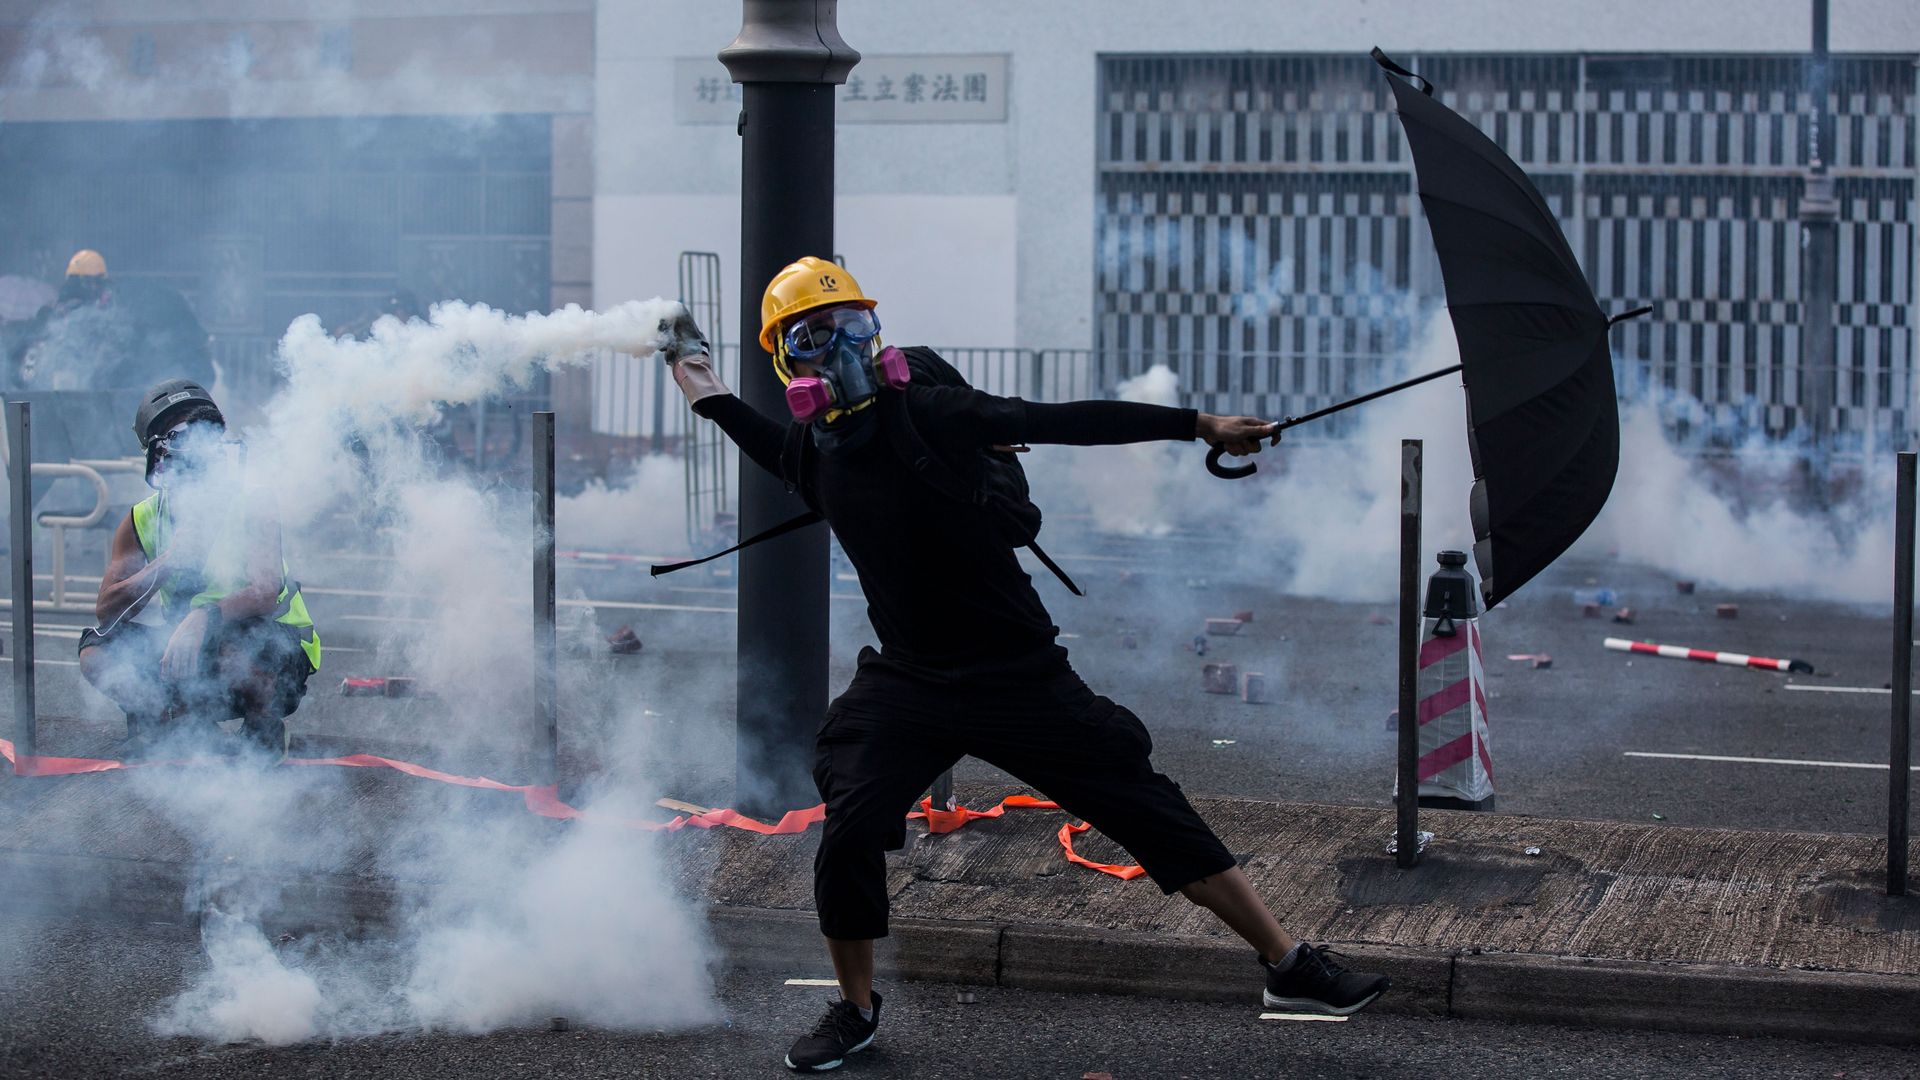 Photo of a protester with an umbrella on Hong Kong street bathed in tear gas